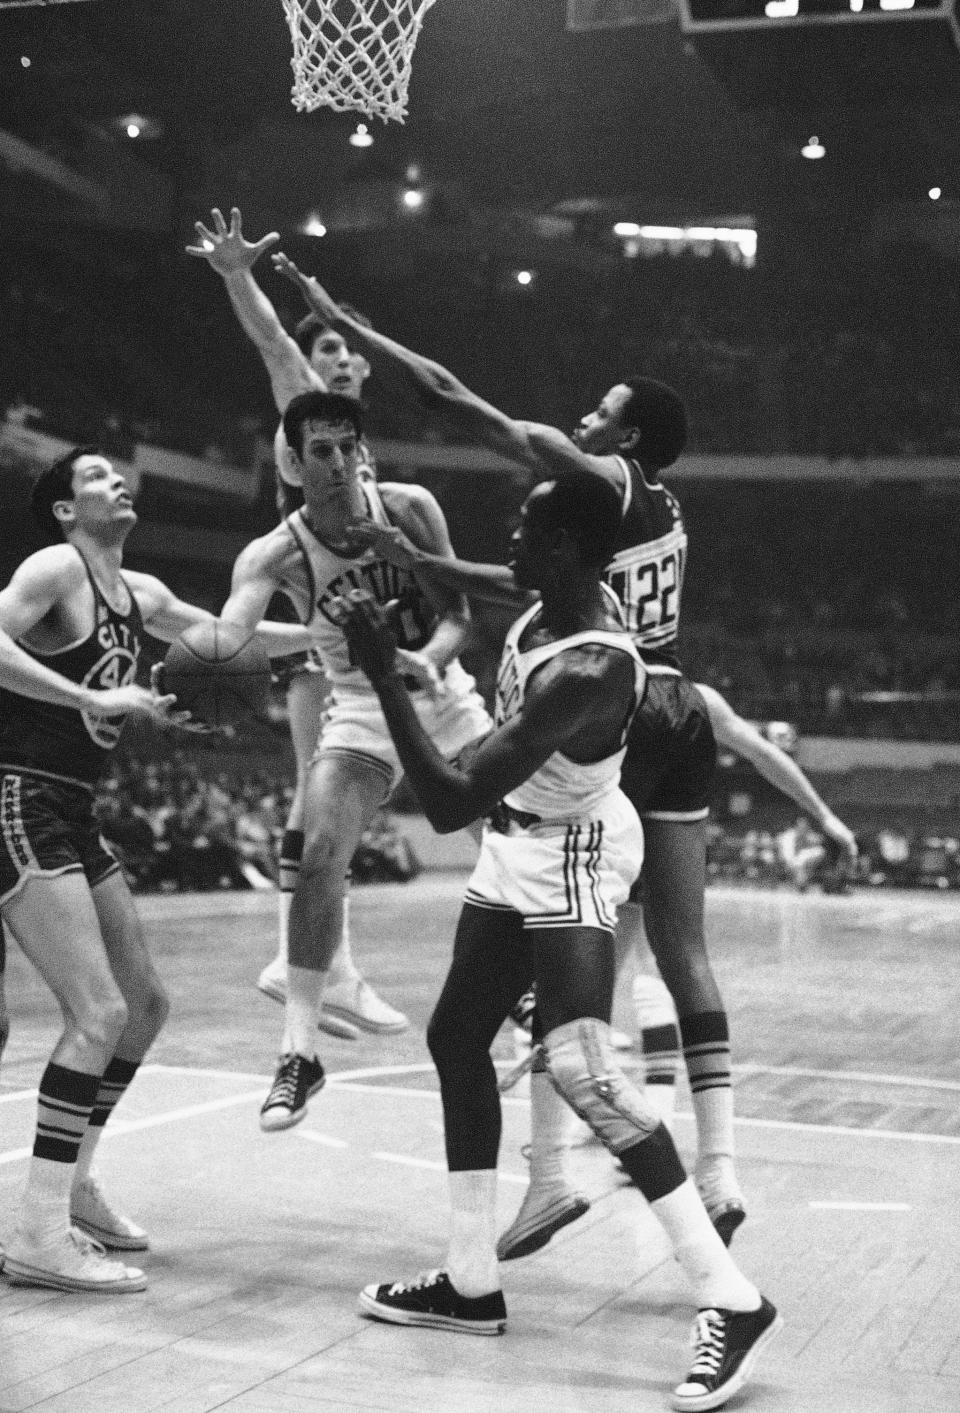 Larry Siegfried of the Boston Celtics comes up with a rebound in a game against the San Francisco Warriors at Boston Garden on Wednesday, Feb. 29, 1968. The other players are Fred Hetzel (44), Bill Turner (22), both of the Warriors, and Tom Sanders of the Celtics.